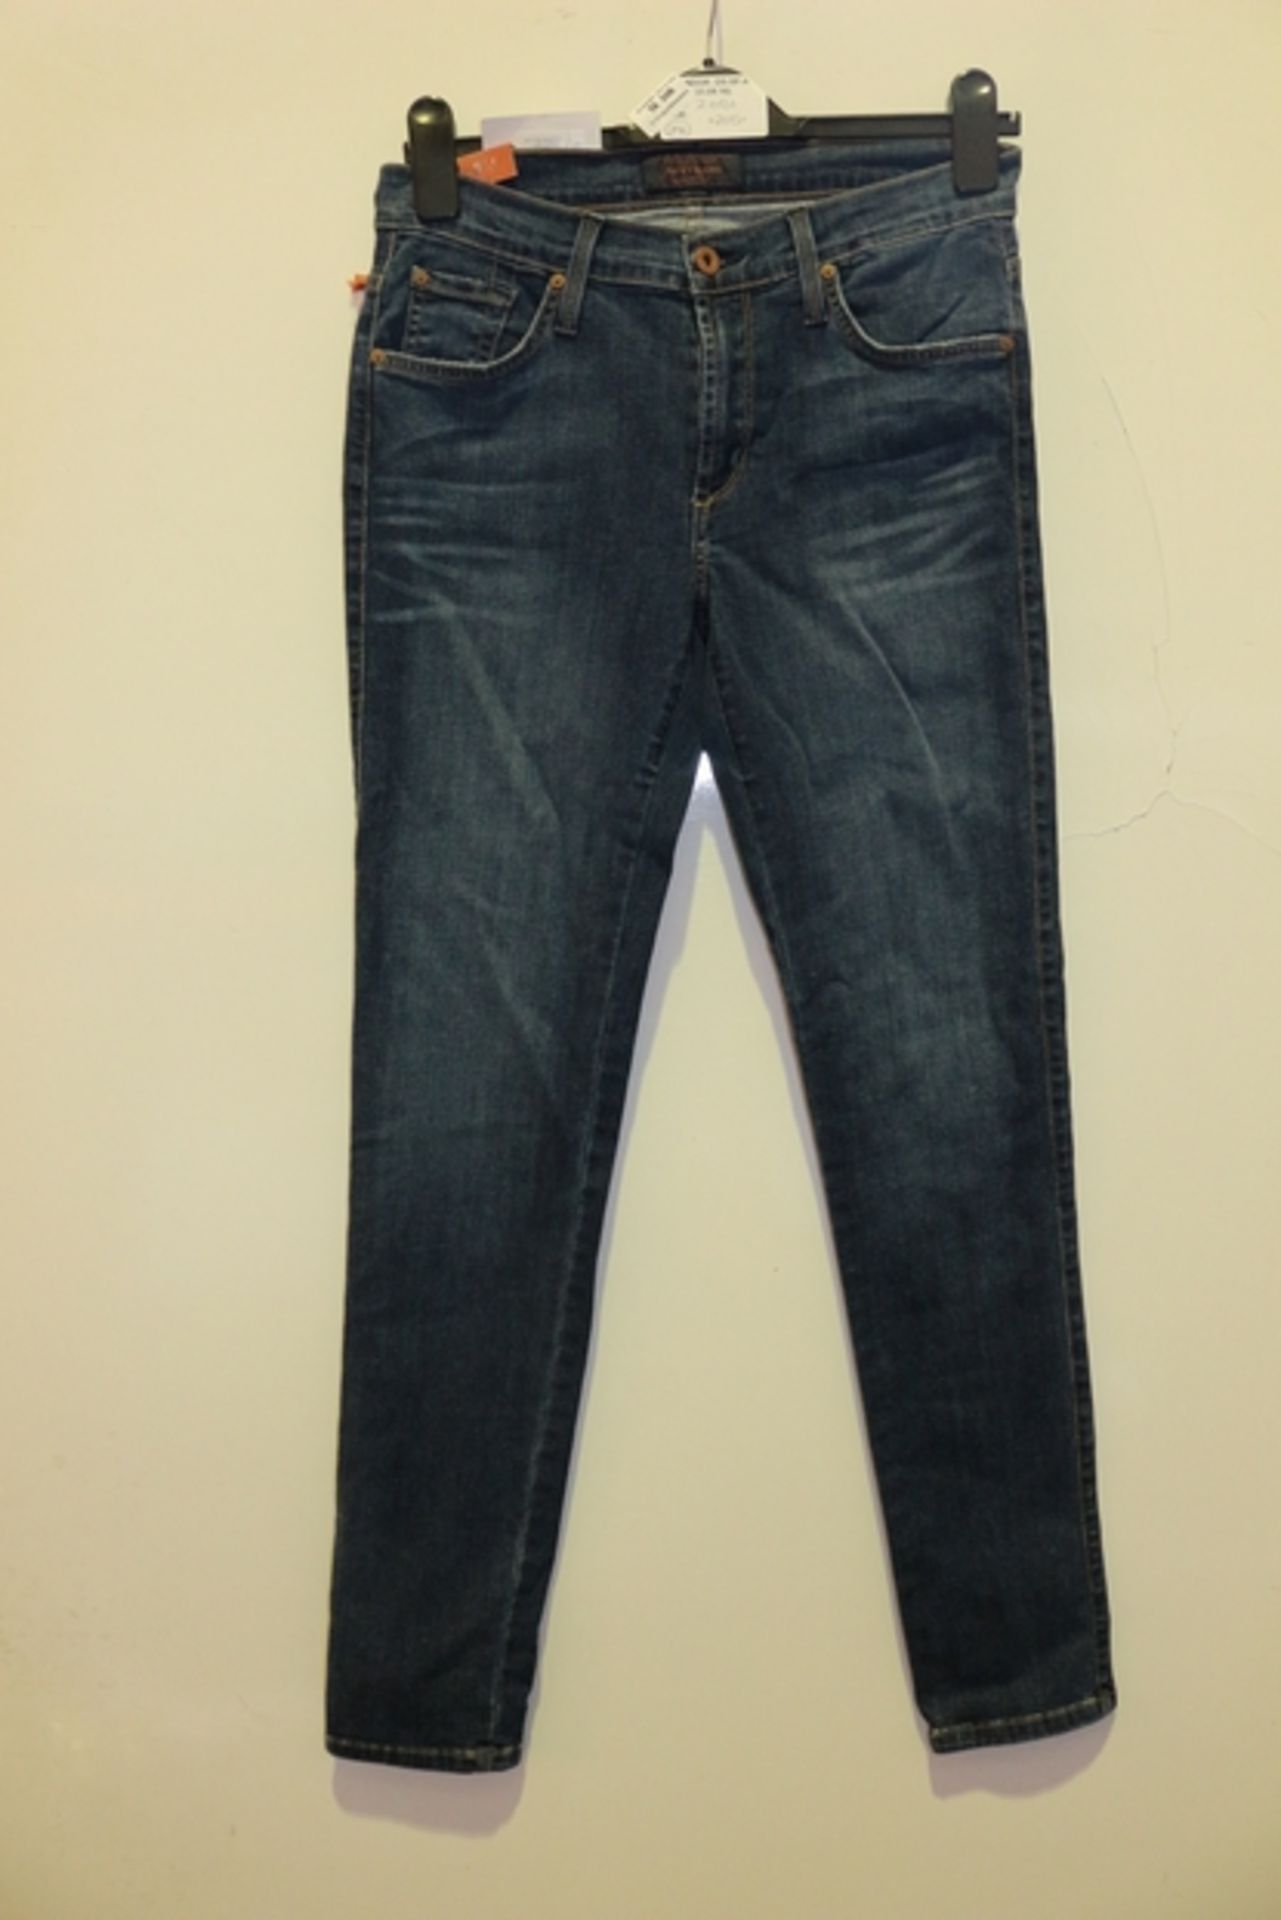 1X BRAND NEW PAIR OF JAMES JEANS SIZE 28L RRP £180 (DS-SF-A) (2.051) (27337075)